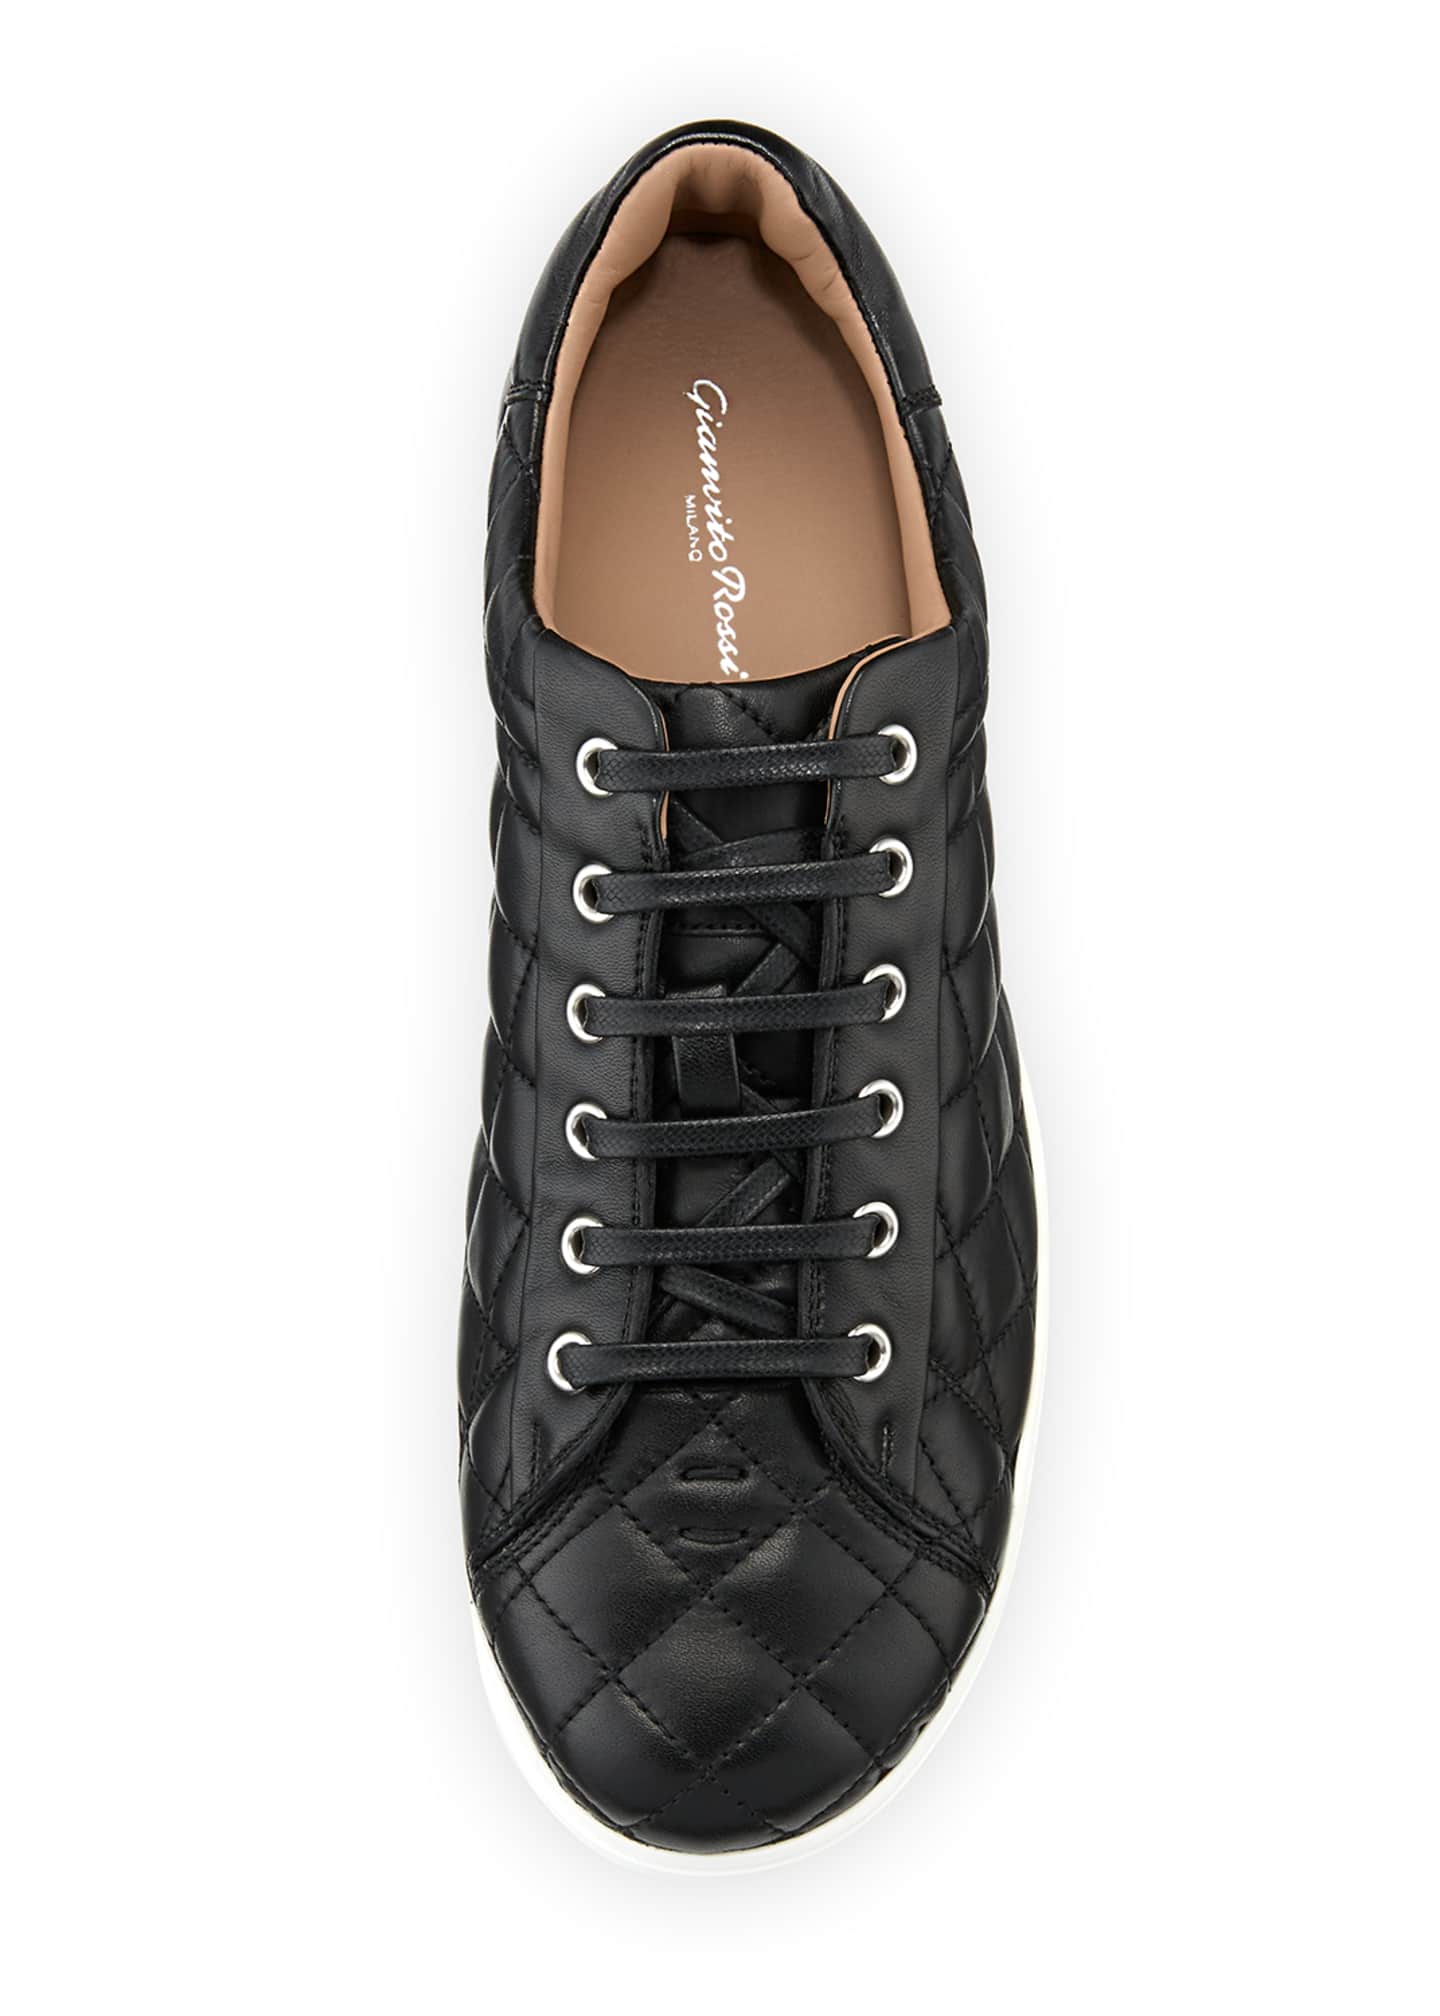 Gianvito Rossi Men's Quilted Leather Low-Top Sneakers, Black (Nero 